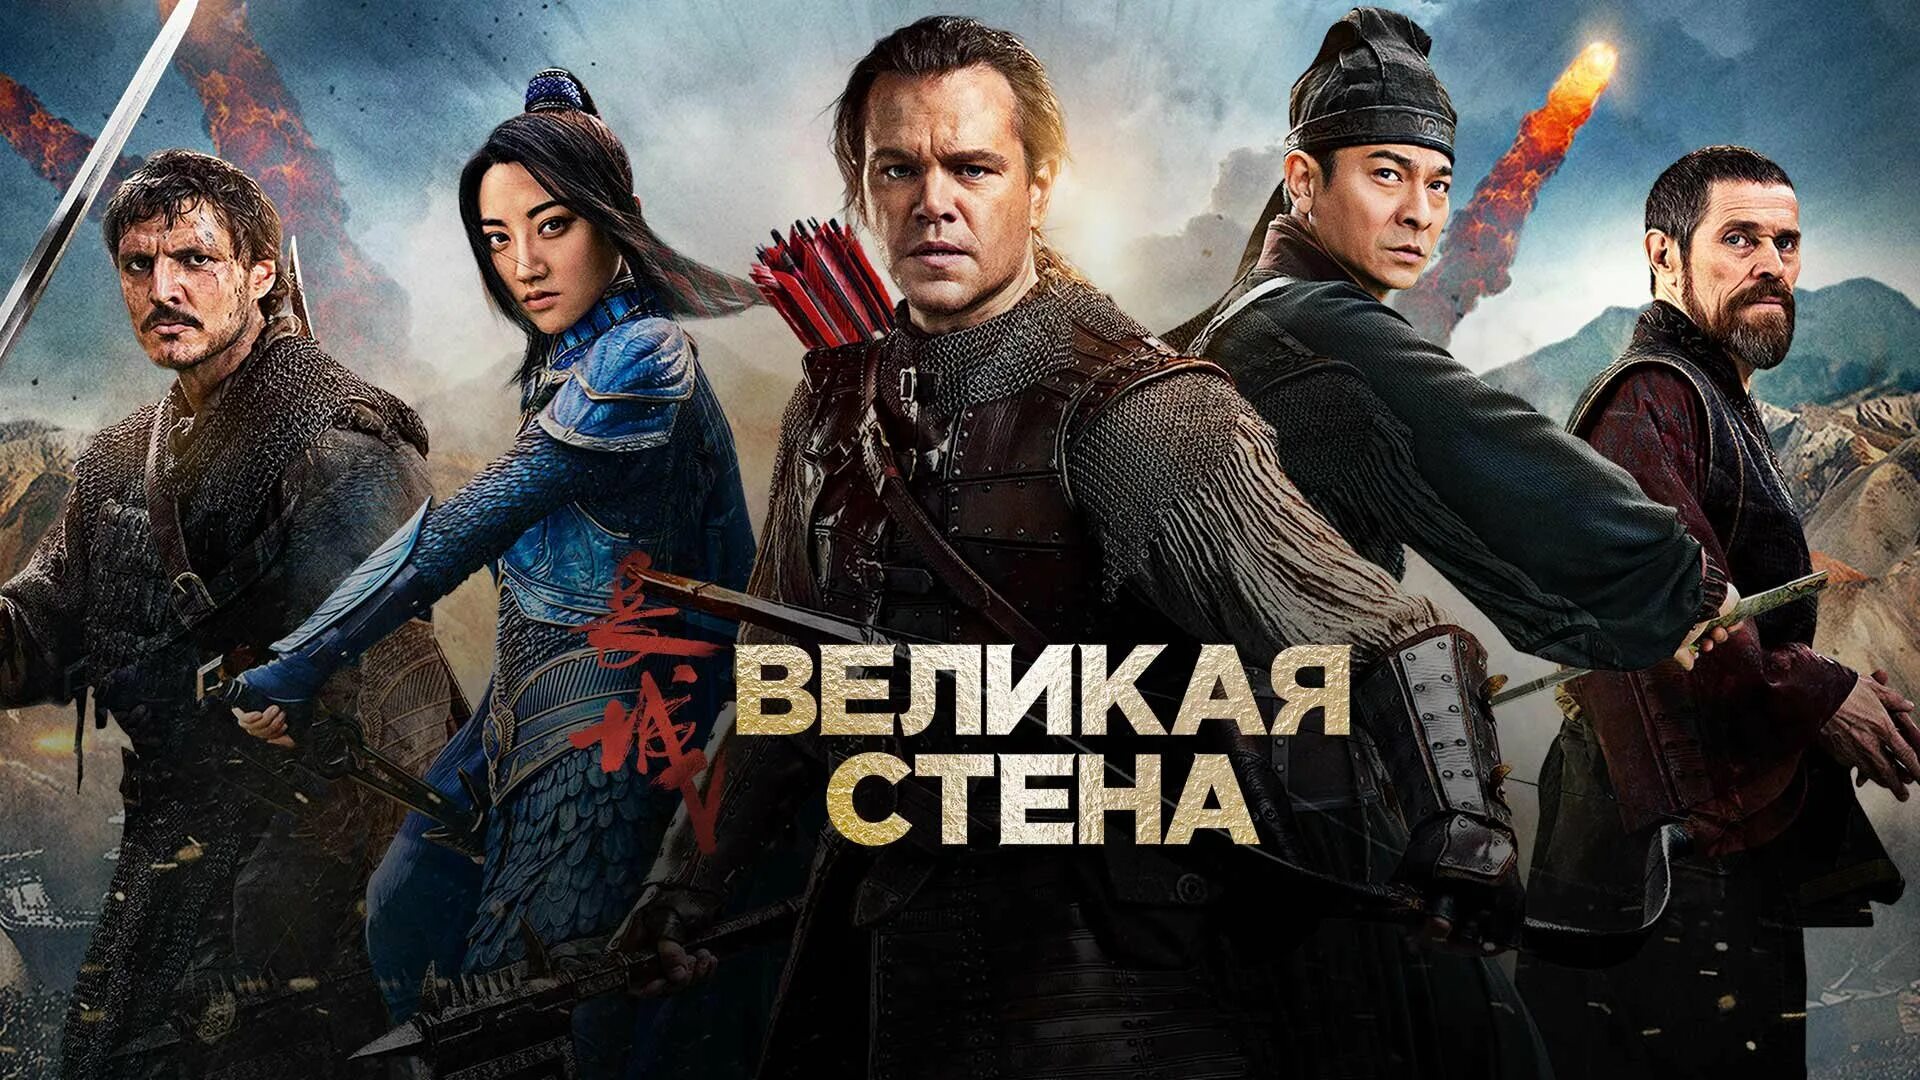 The great Wall 2016. Уиллем Дефо Великая стена. Великая стена полностью